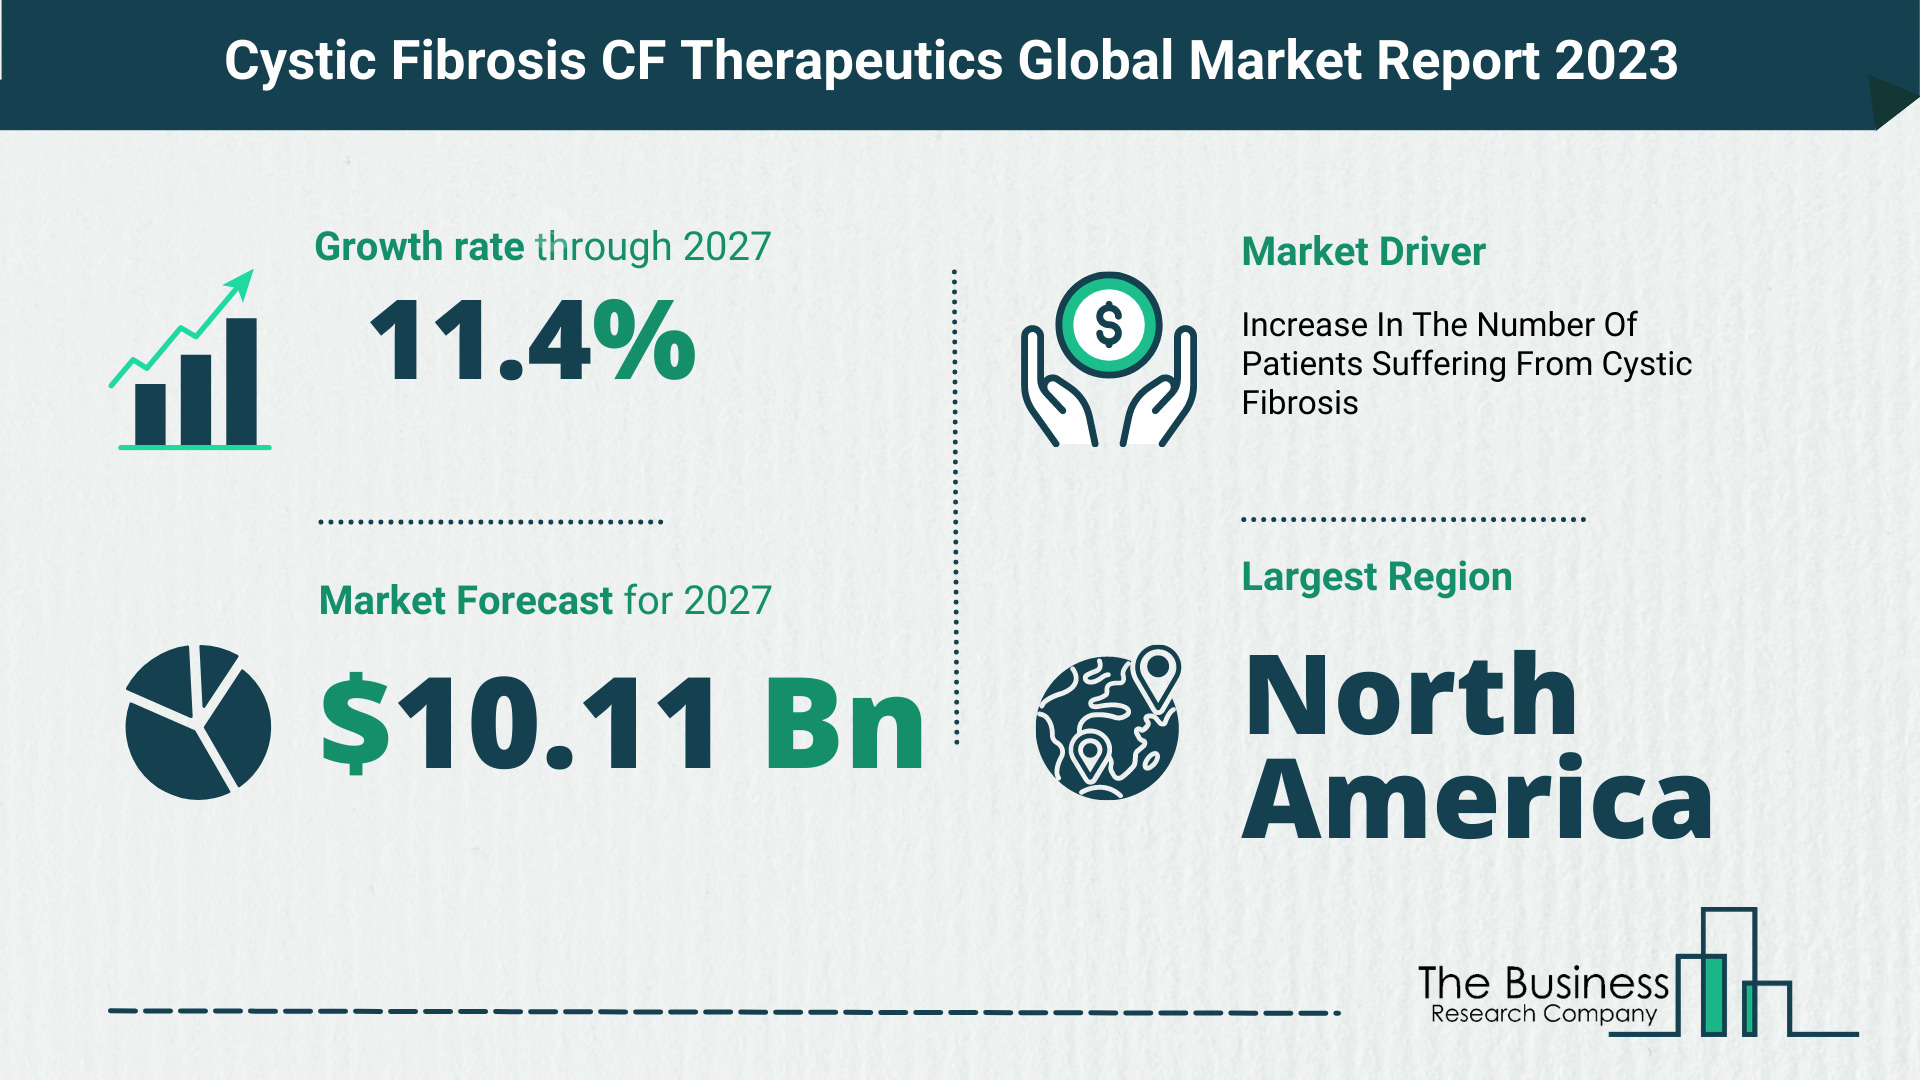 Cystic Fibrosis CF Therapeutics Market Size, Share, And Growth Rate Analysis 2023